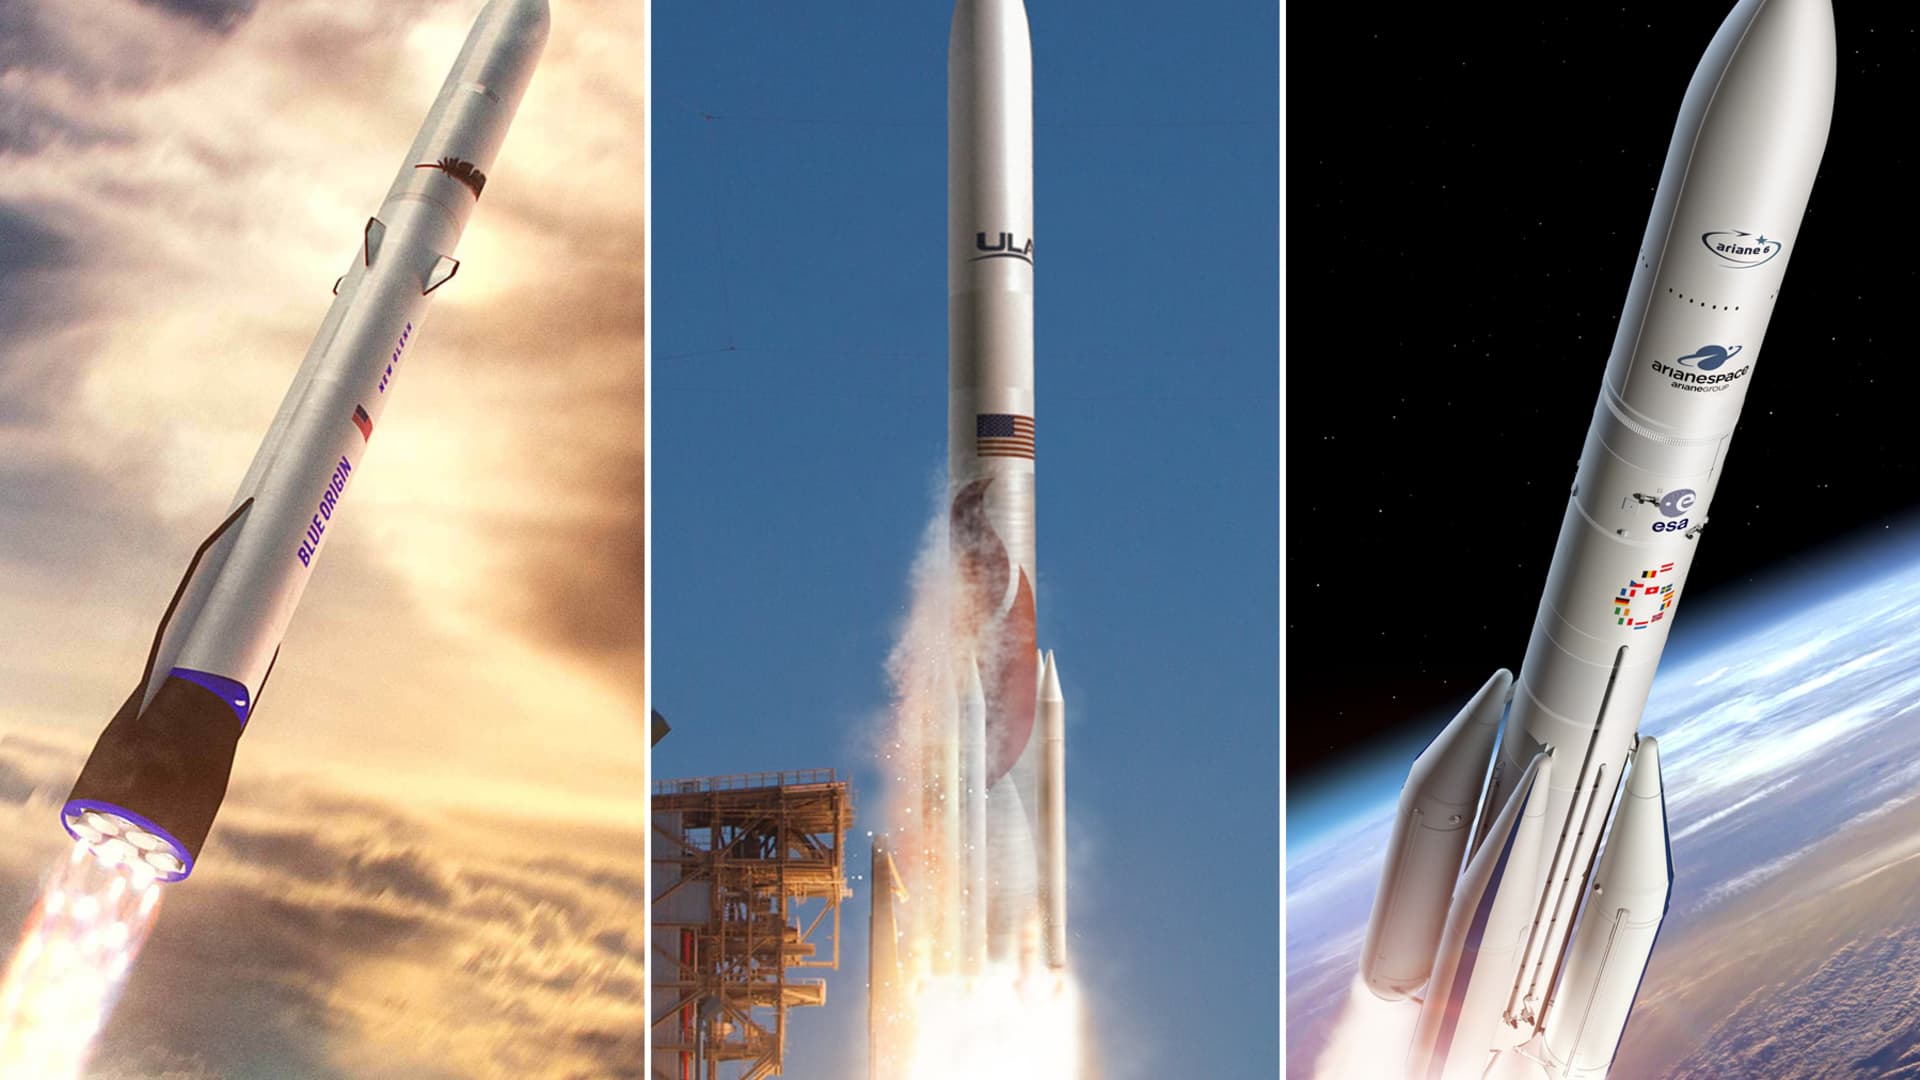 Artist renderings of the companies' rockets, from left to right: New Glenn, Vulcan Centaur, and Ariane 6.